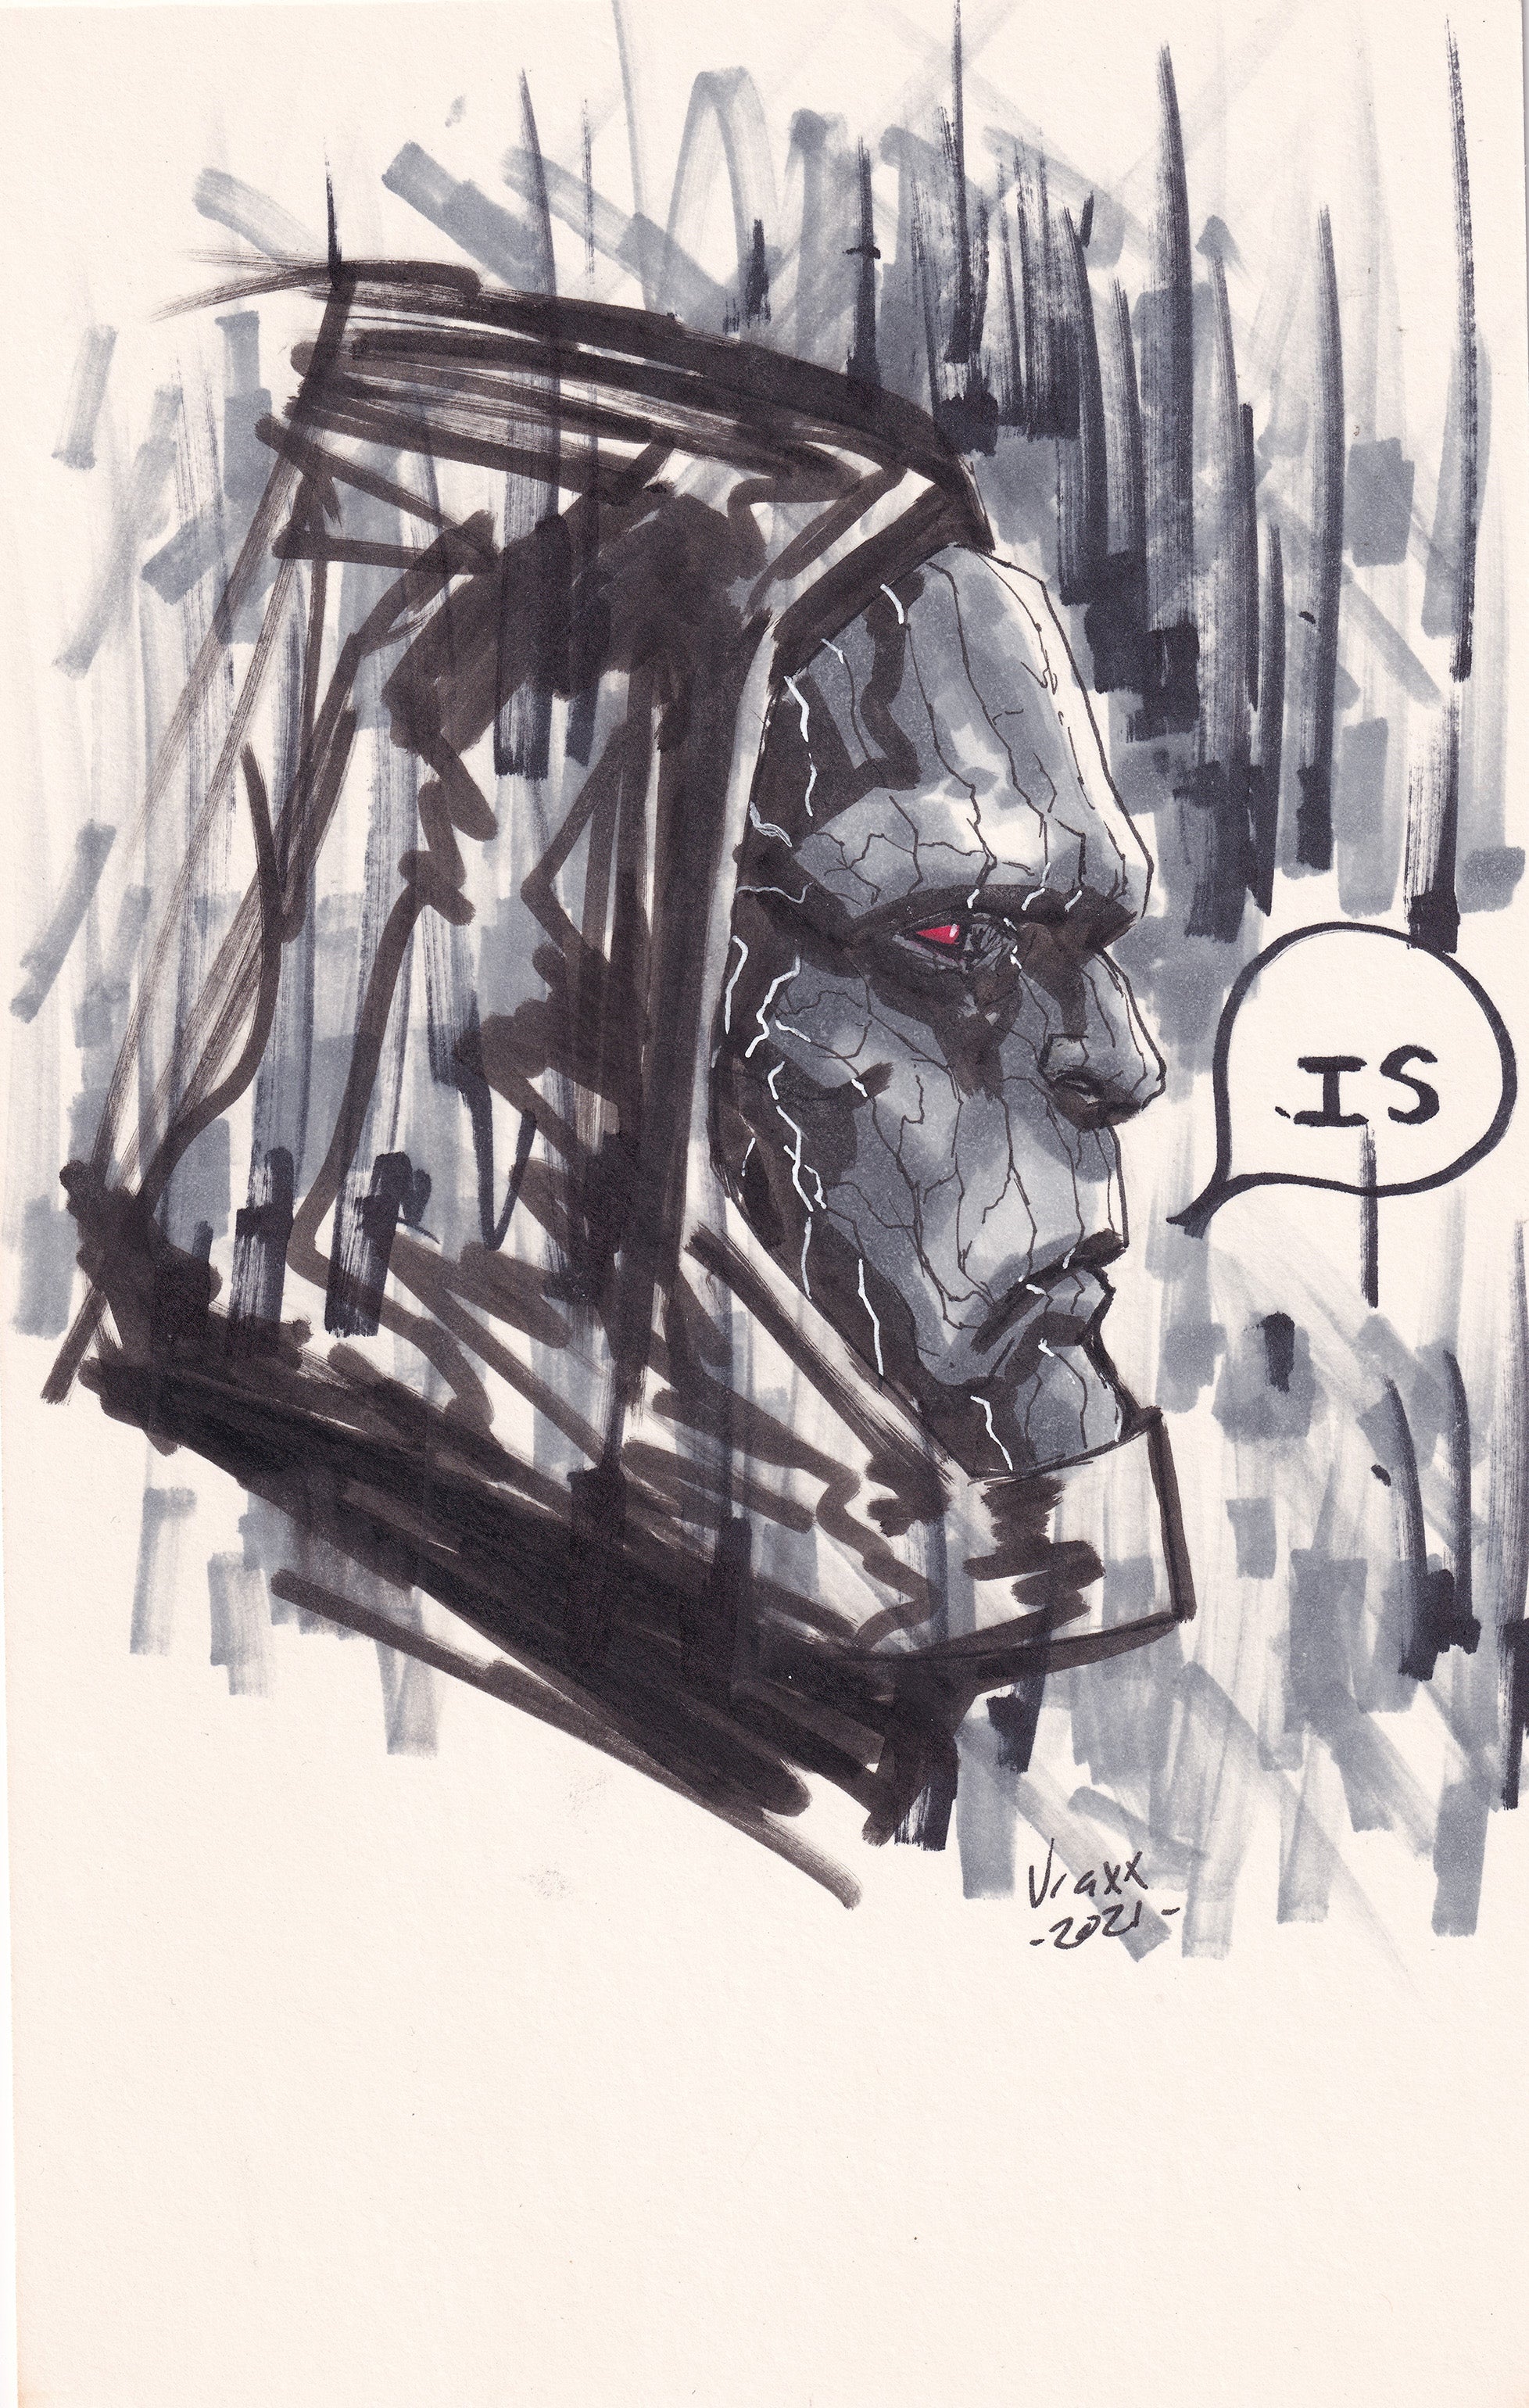 Darkseid 6 1/2" x 10 1/2" Copic Marker on comic backboard sold by Stronghold Collectibles